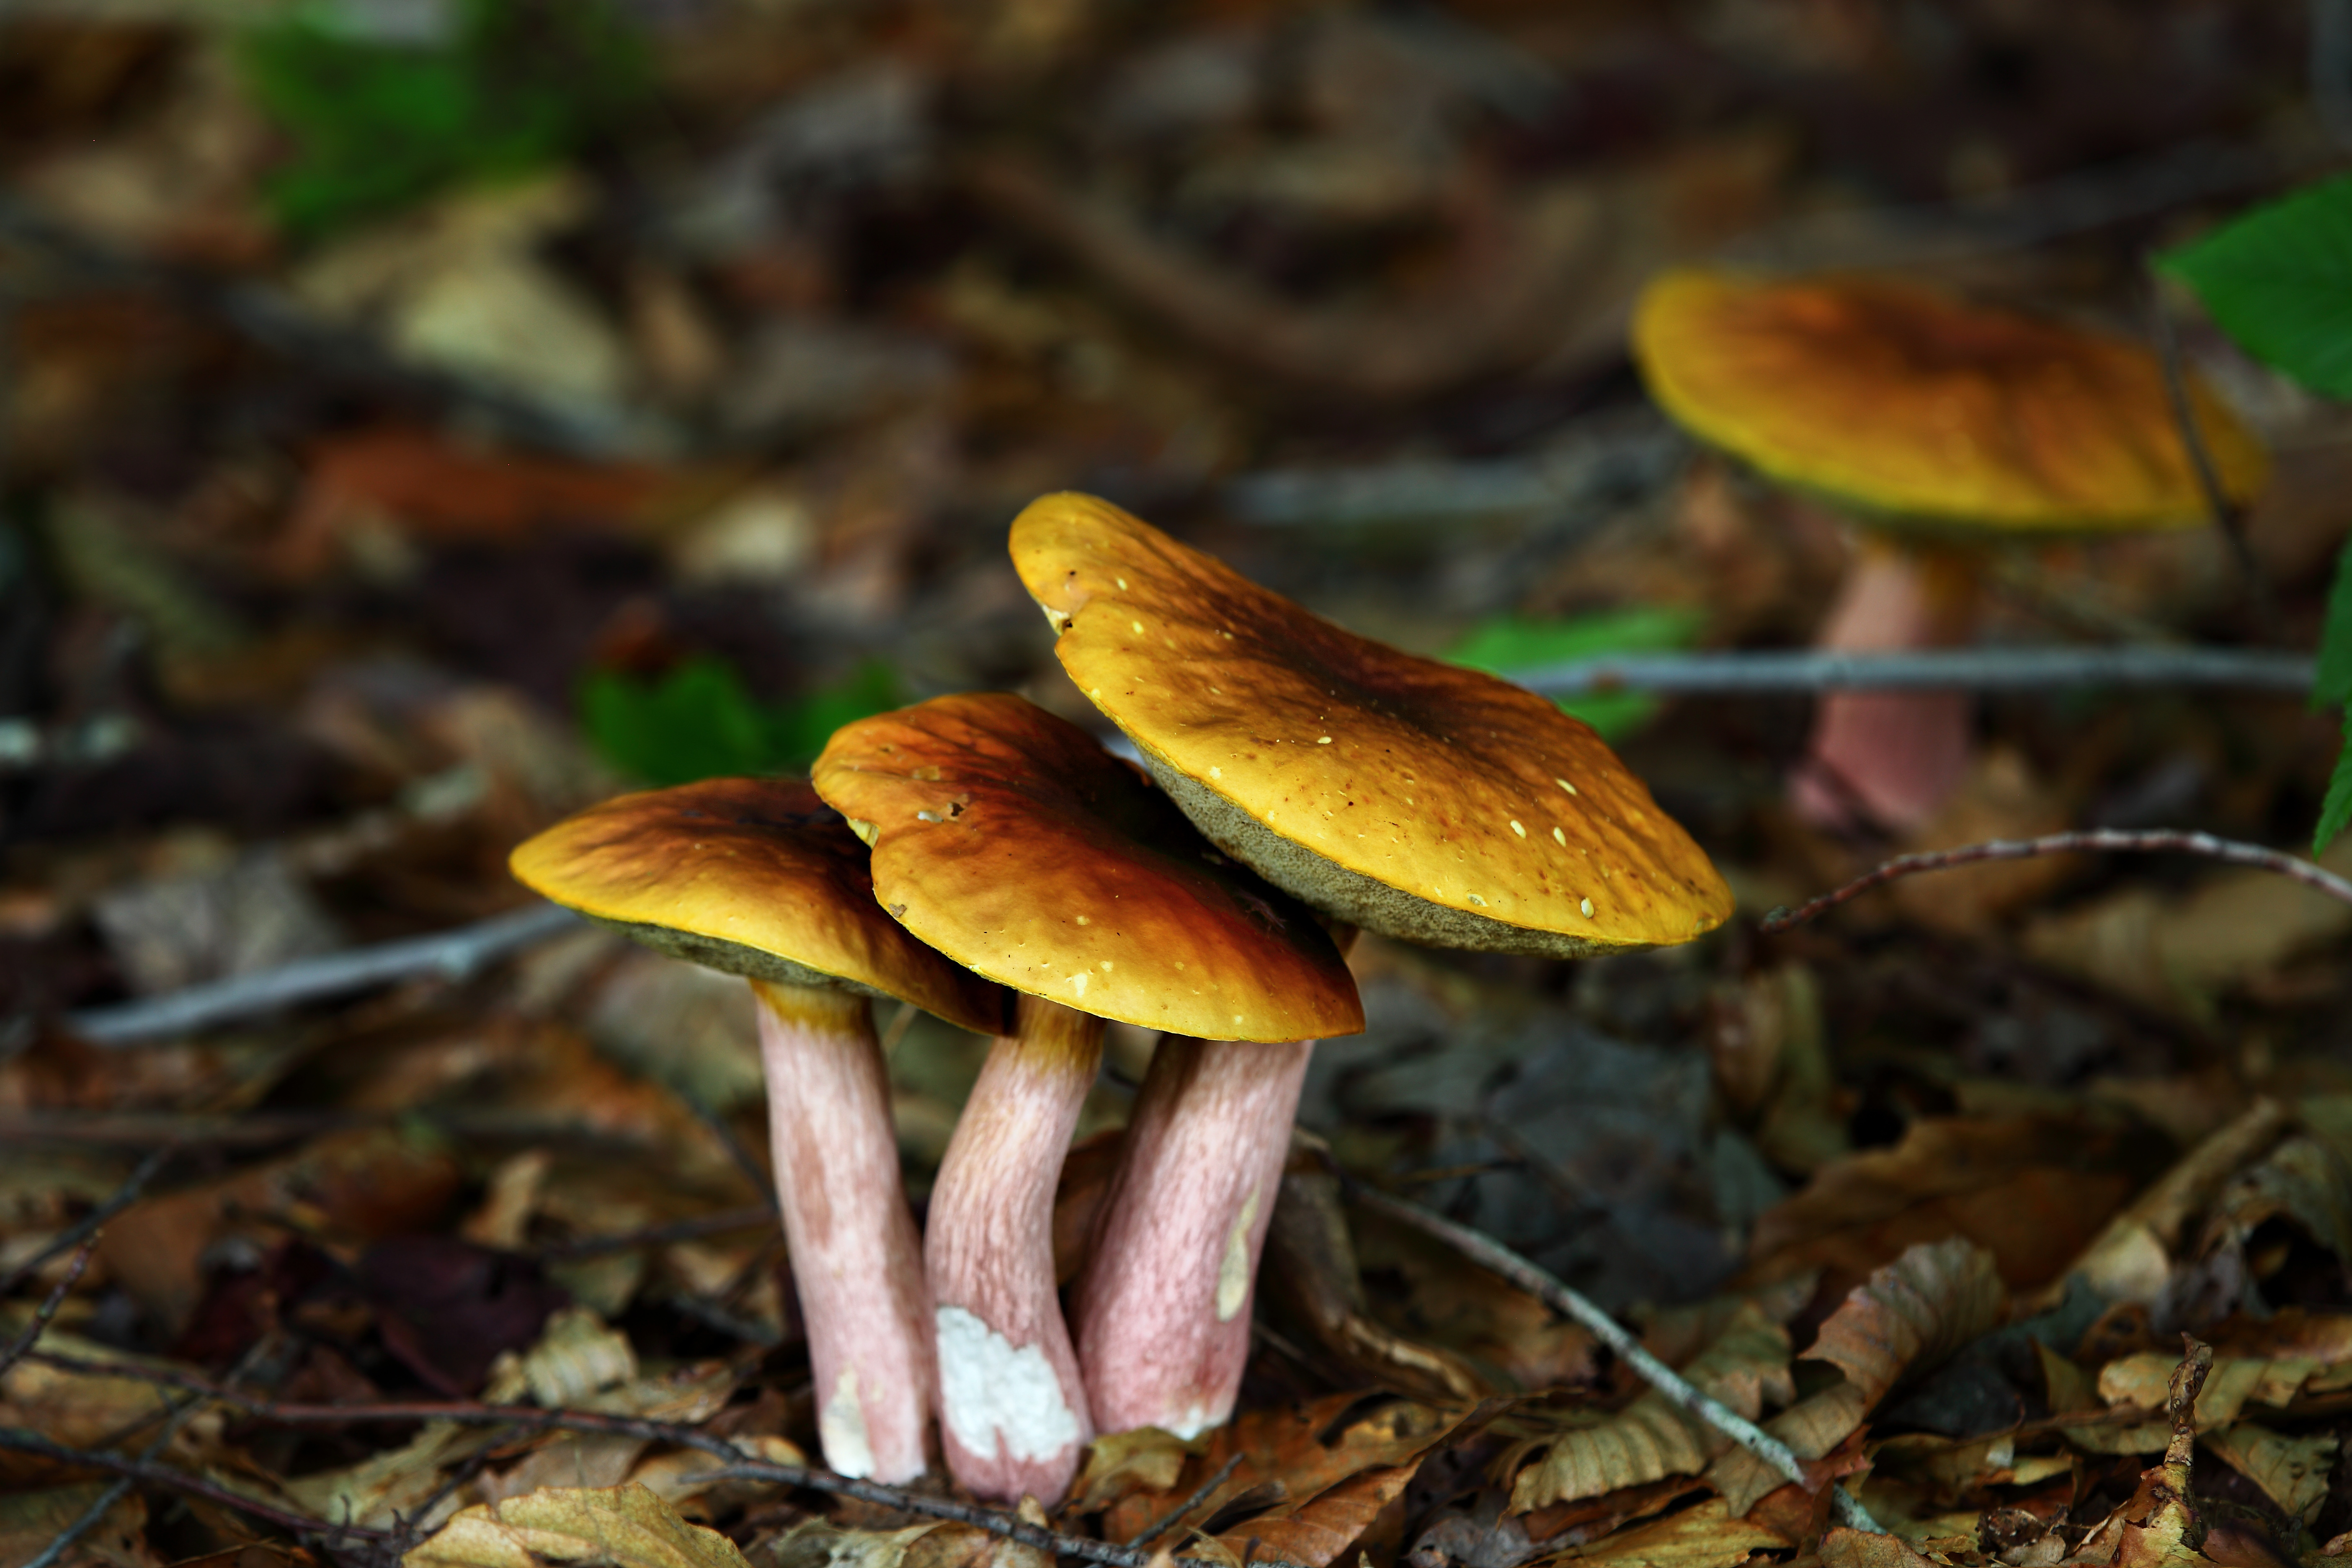 Forest Mushrooms | Unusual| Free Nature Pictures by ForestWander ...